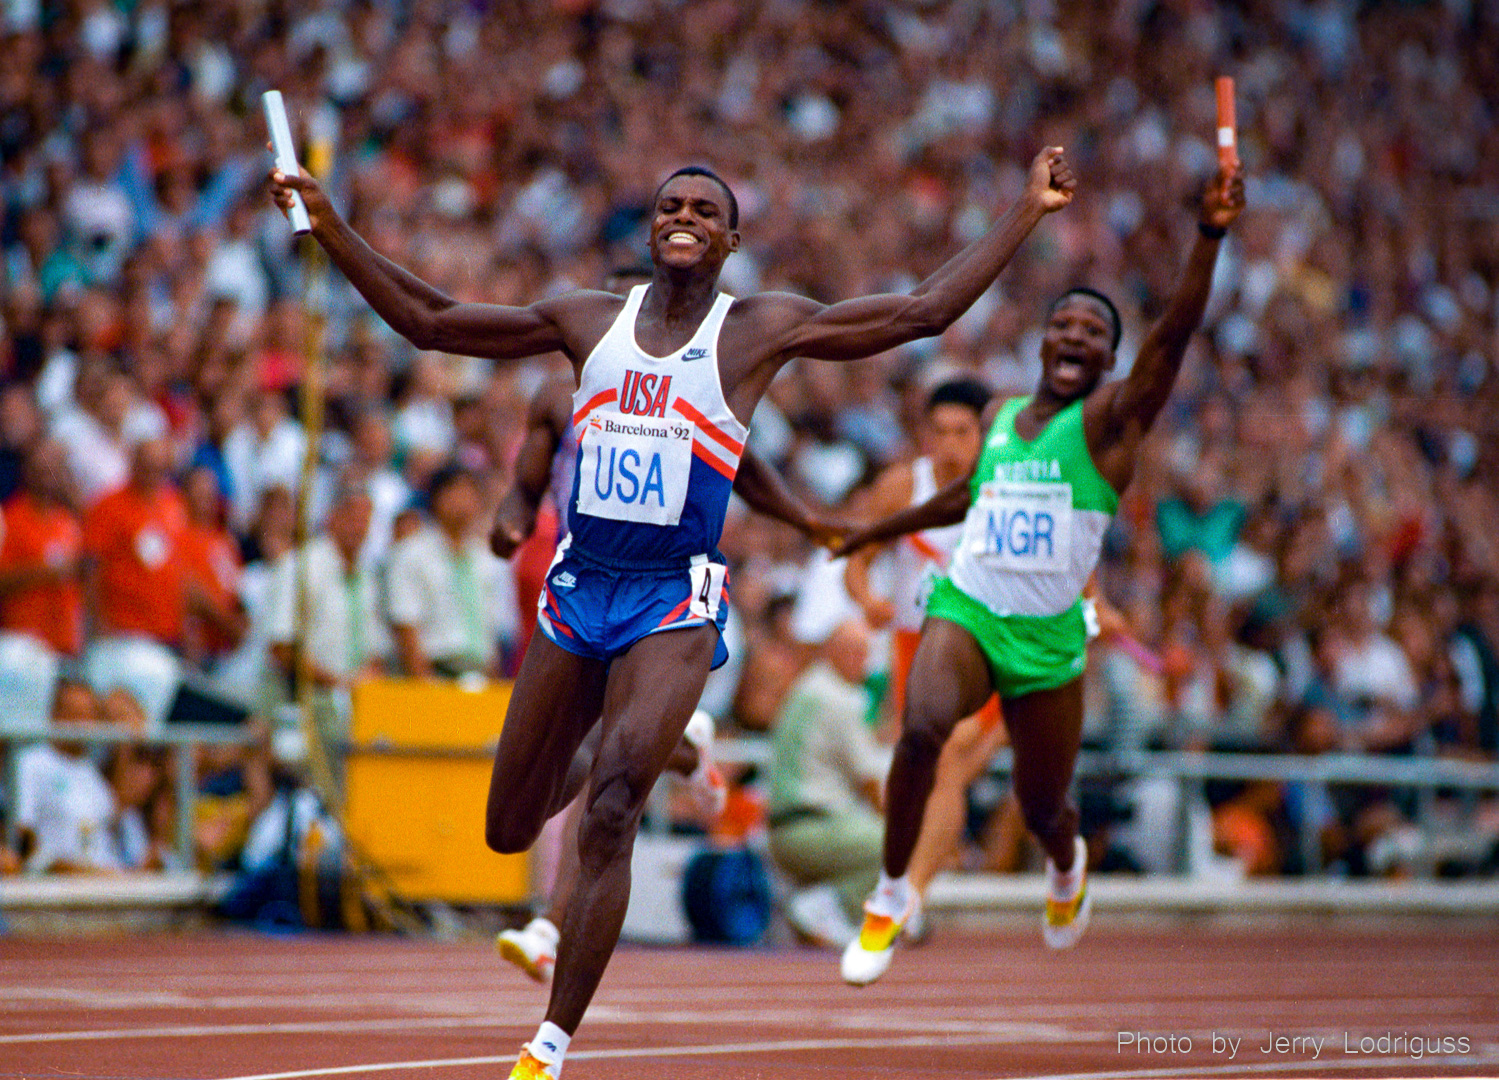 Carl Lewis anchor the US to a world record gold medal in the 4x100 meter relay at the 1992 Barcelona Olympics. Lewis was not even supposed to run on the team, but was added when a teammate was injured.  Lewis has won 9 gold medals at 4 Olympics. He won golds in the 100, 200, long jump and 400-meter relay at Los Angeles in 1984, golds in the 100 and long jump at Seoul in 1988,  golds in the long jump and 400-meter relay in Barcelona and a gold in the long jump in Atlanta in 1996.